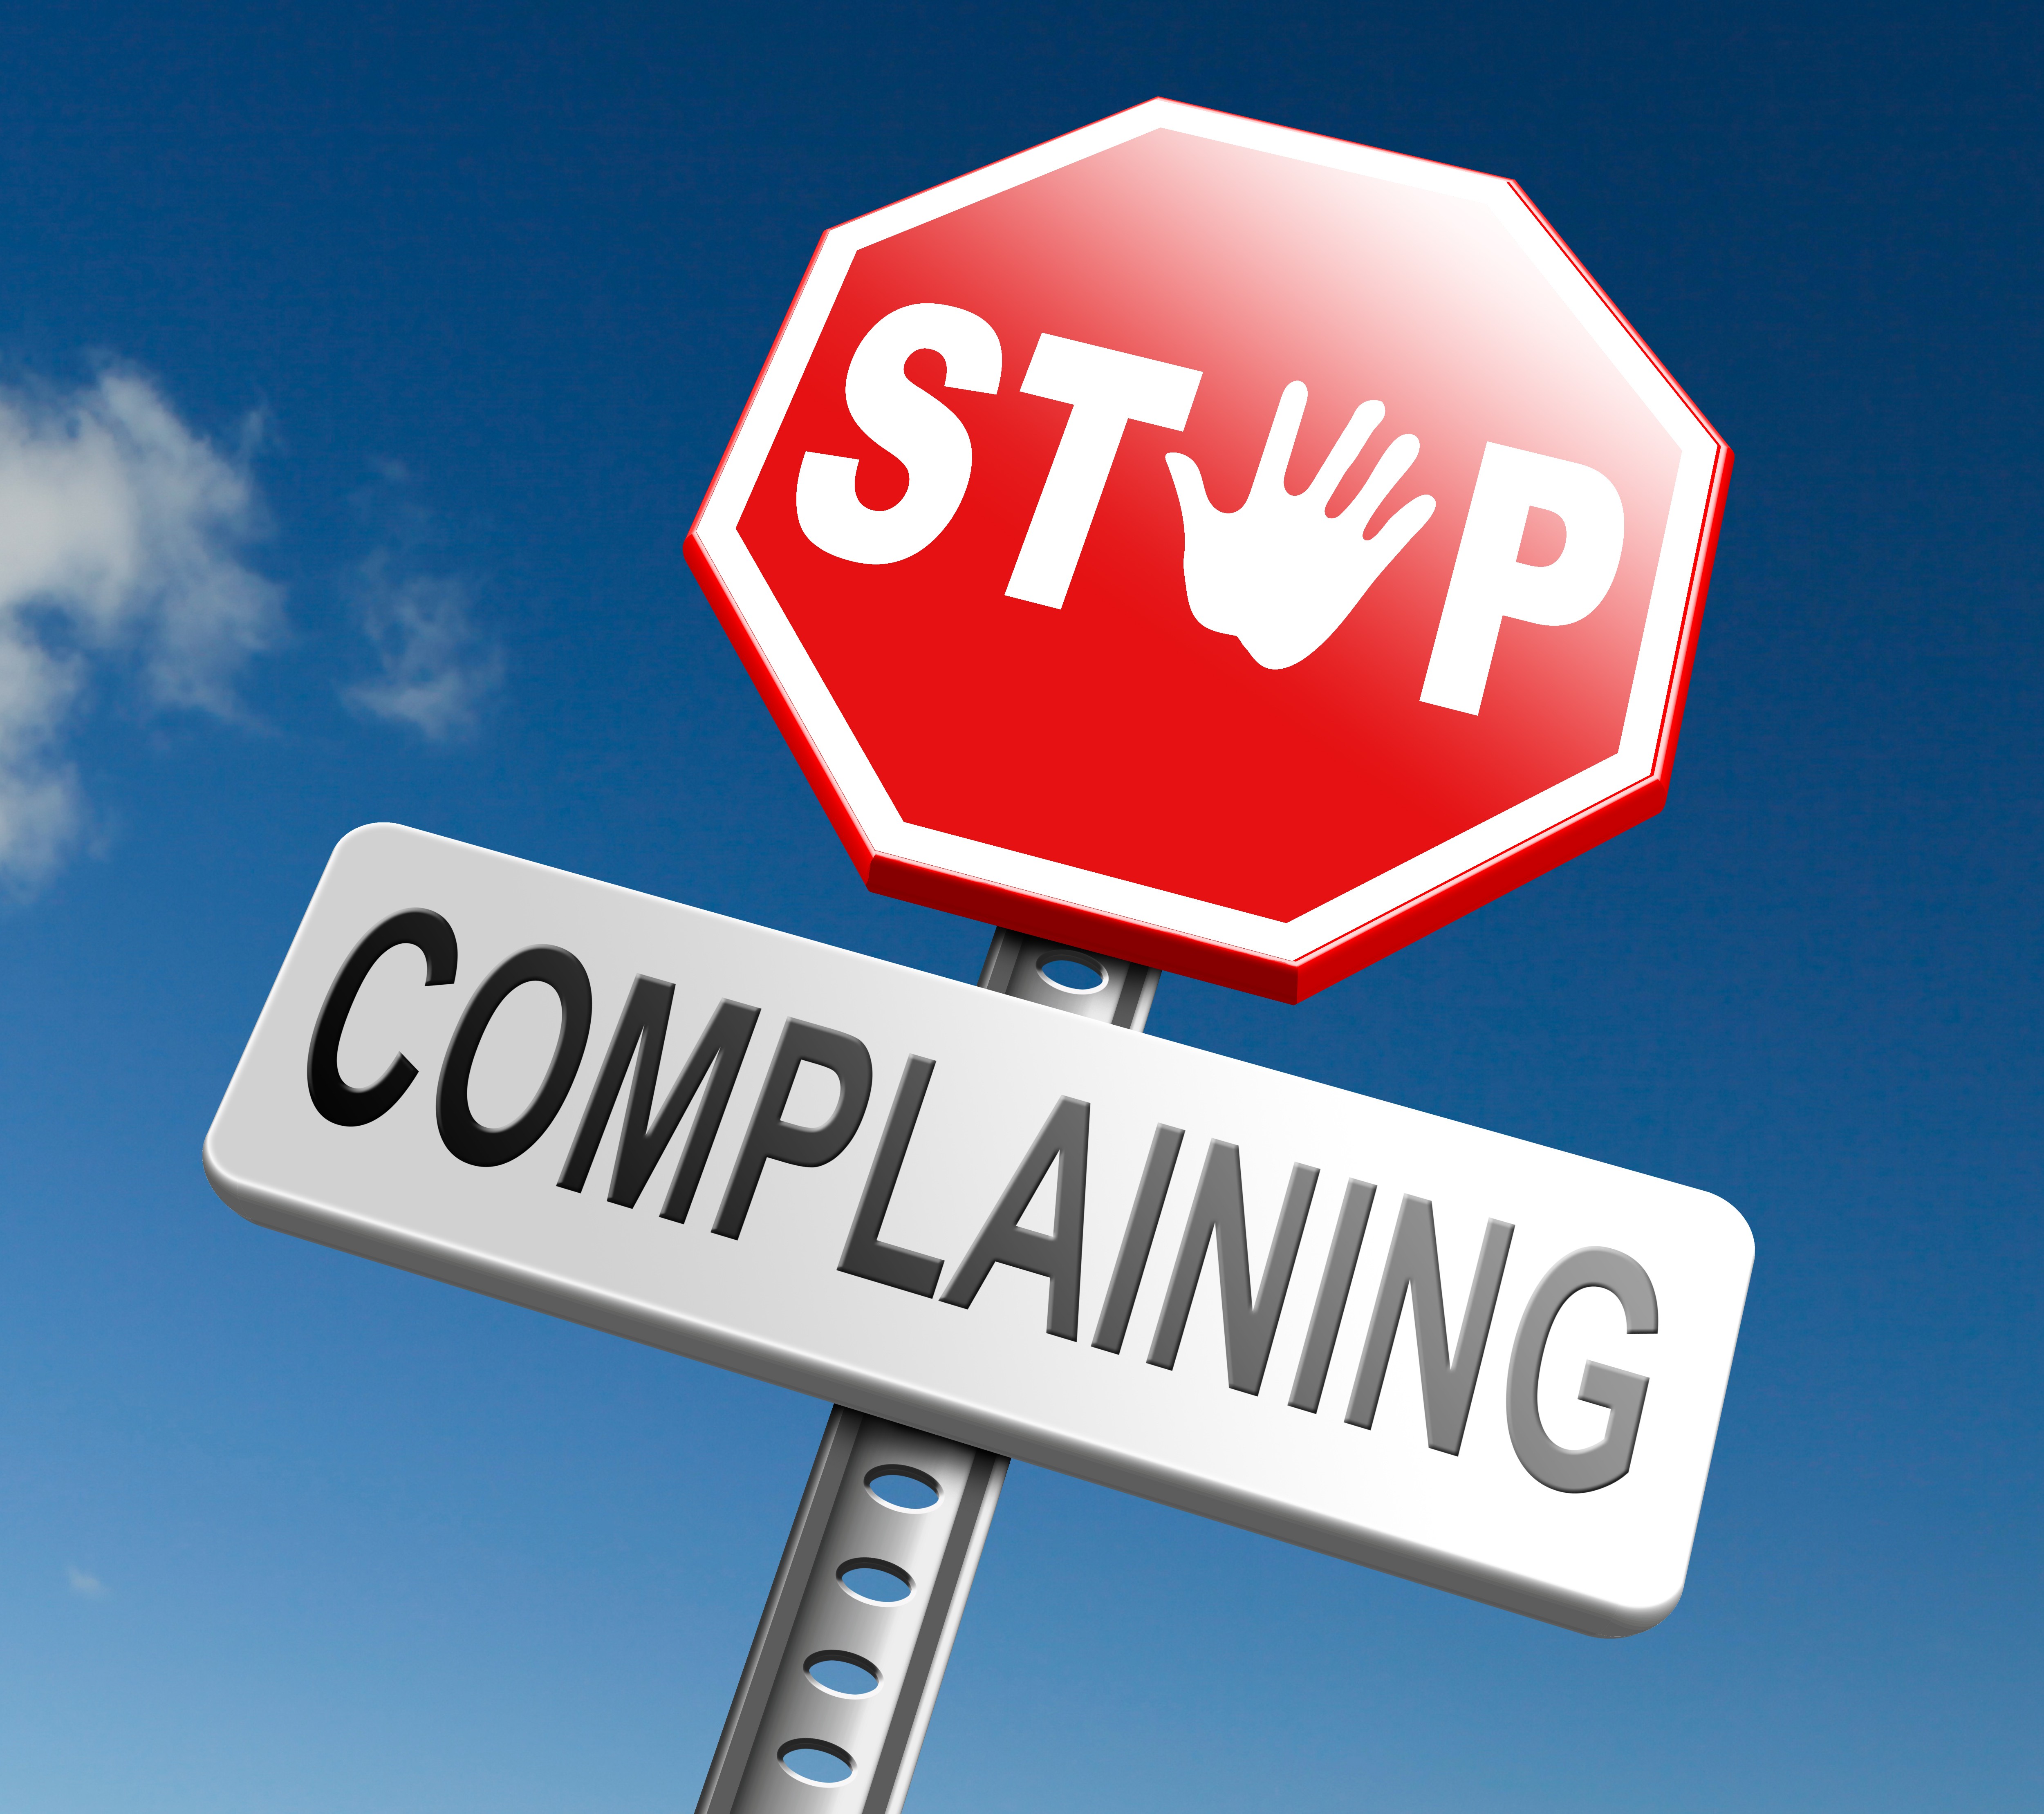 While we all love to vent our thoughts, constant complaining shrinks the part of the brain critical to problem solving and intelligent thought. Experts say there are simple things you can do to control your negative commentary